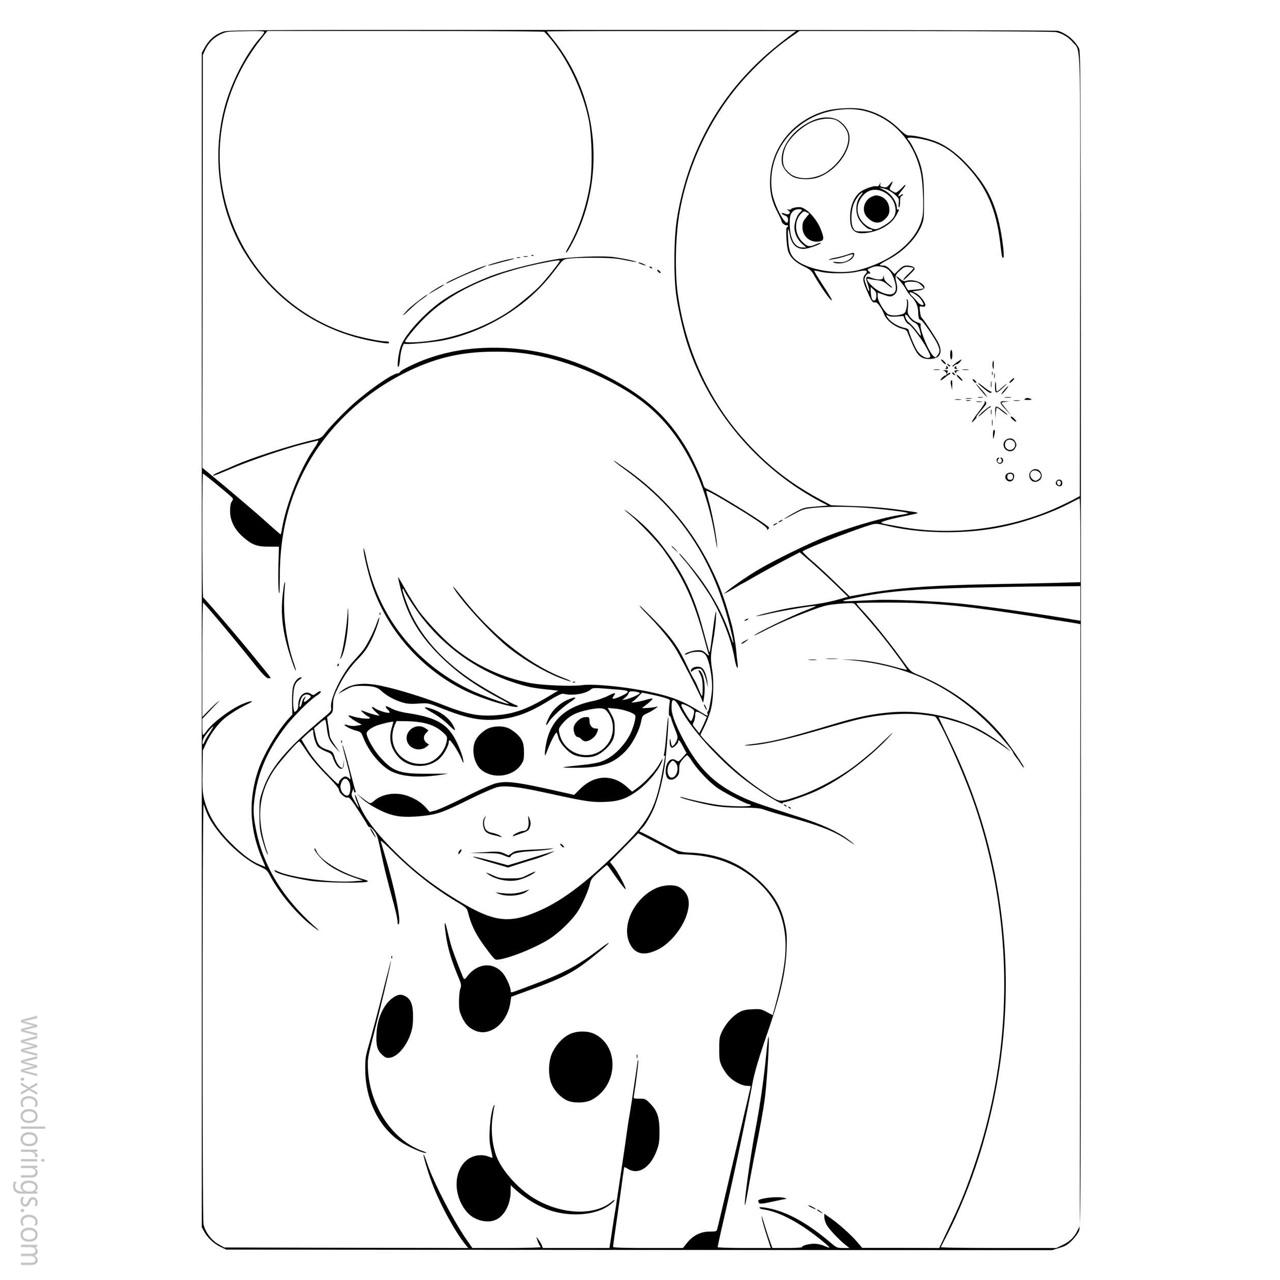 Miraculous Ladybug Coloring Page Luxury Tikki Coloring Page Free ...